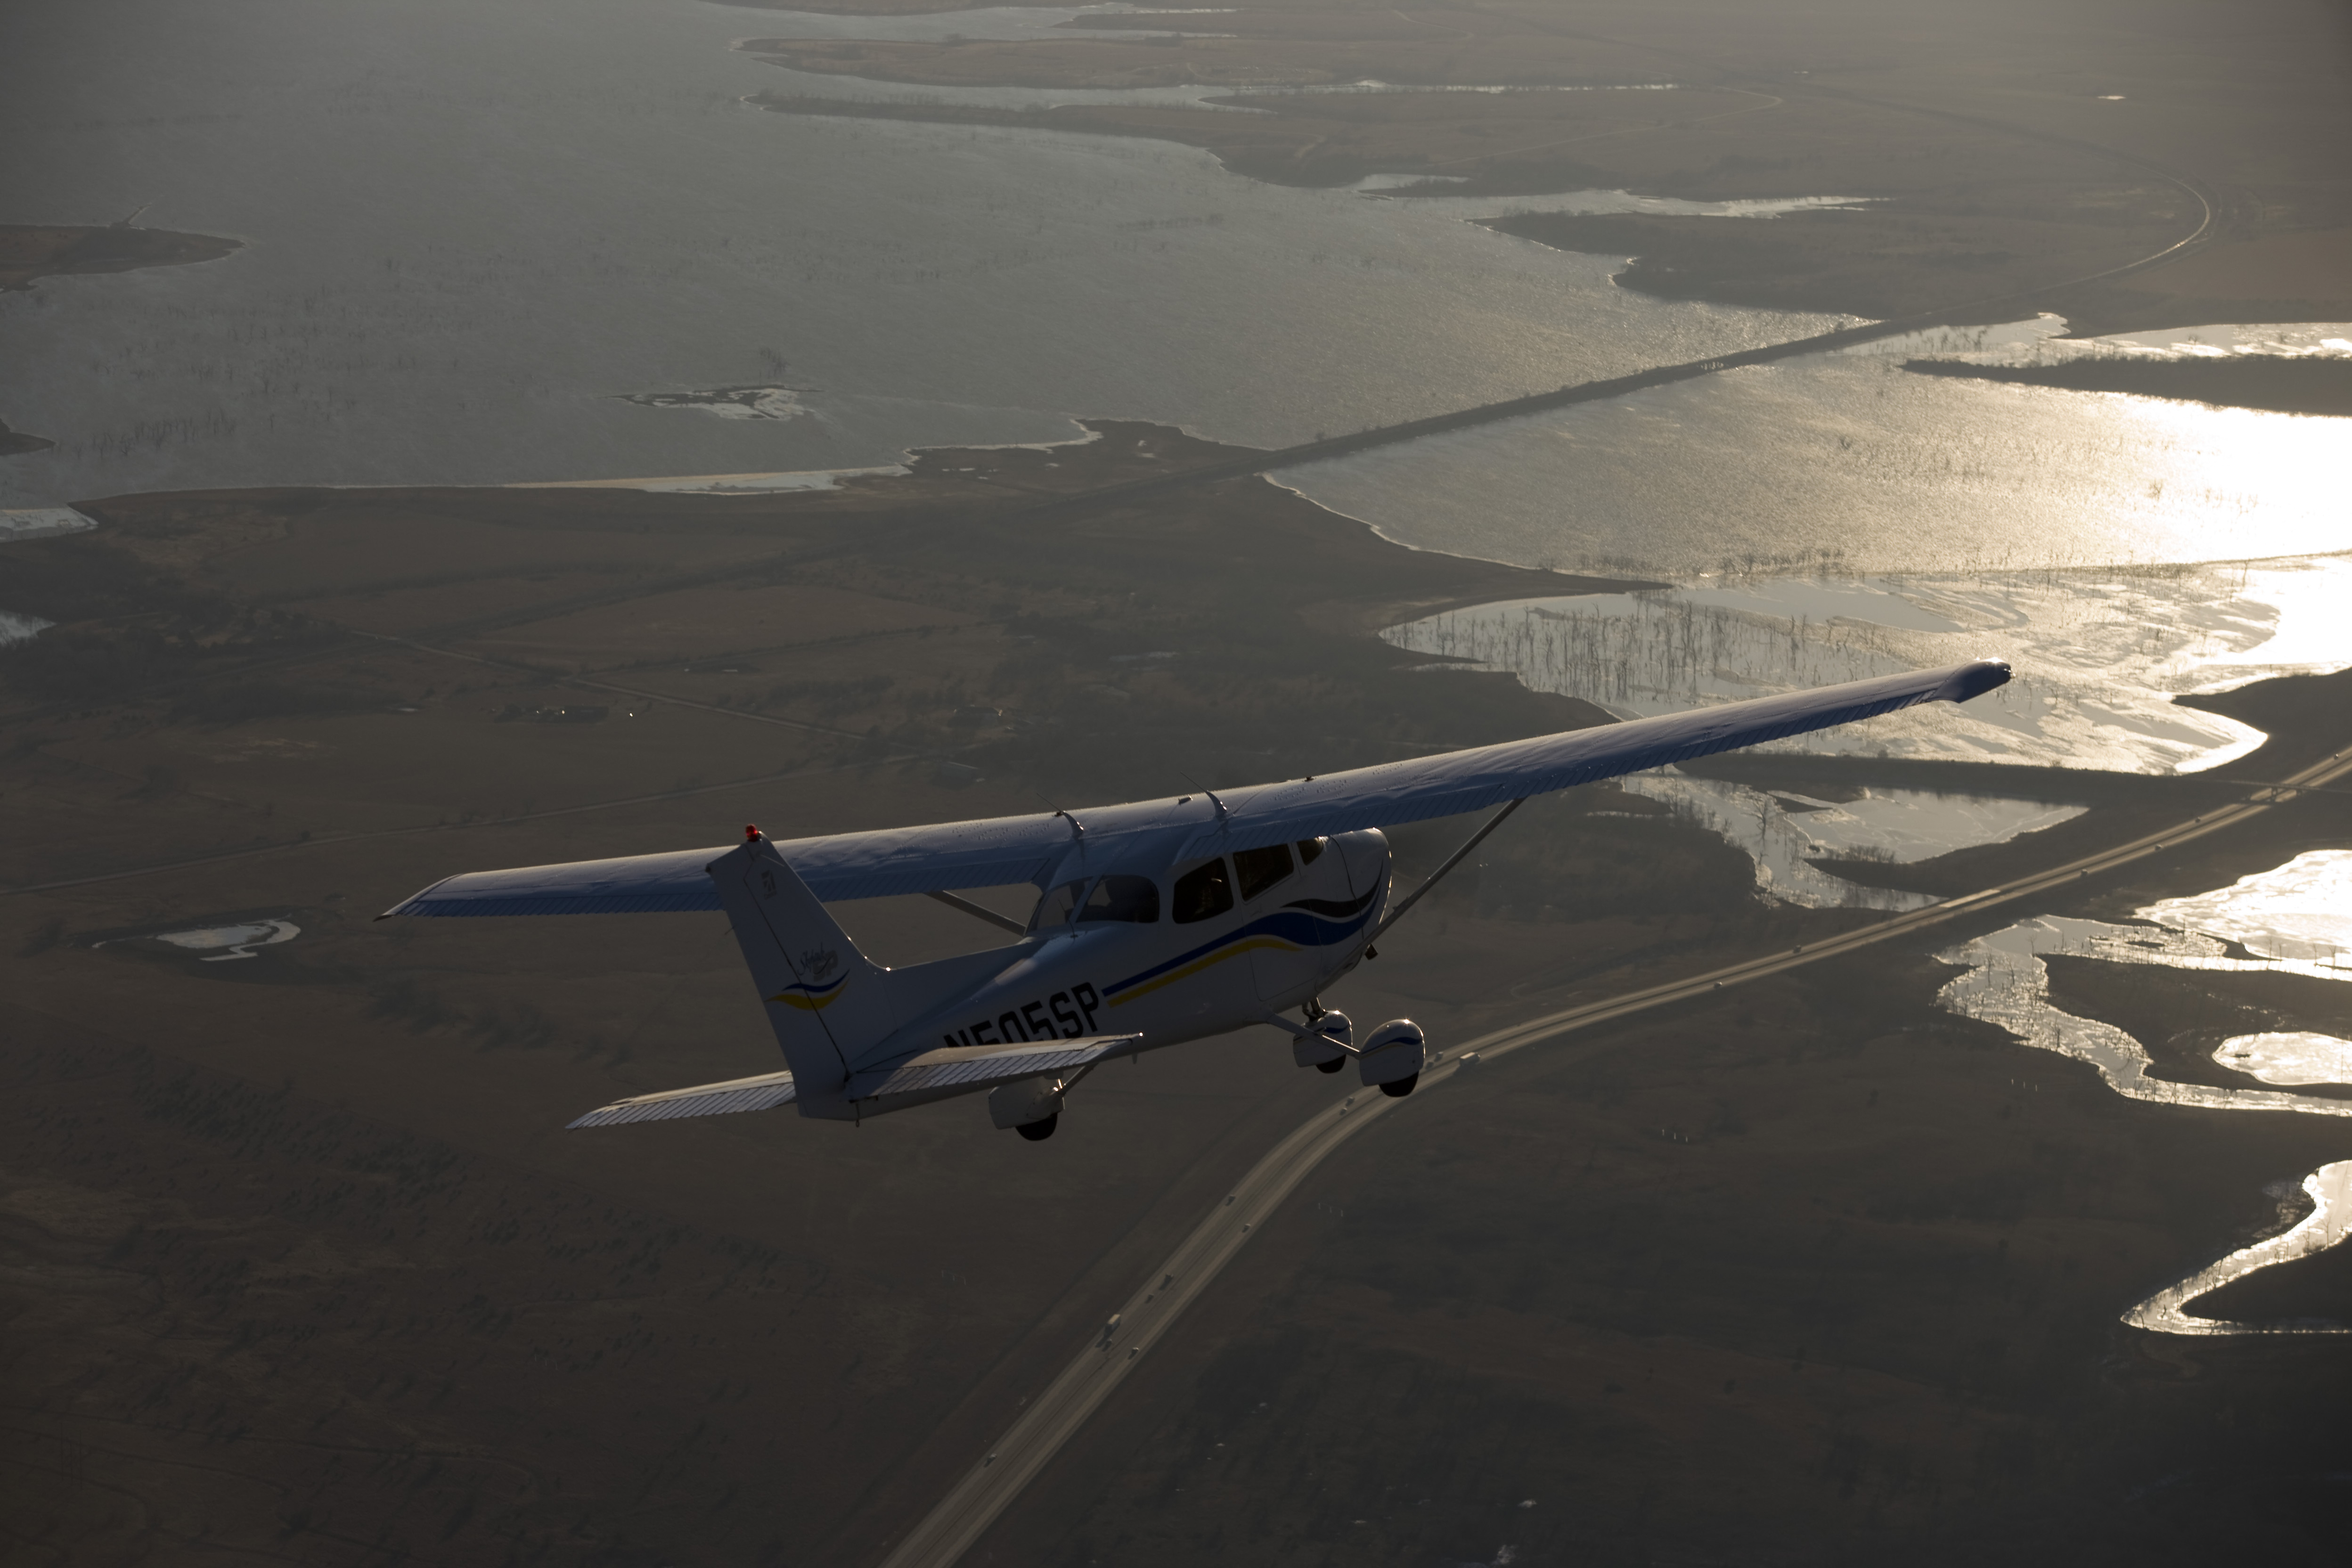 Aerial photography of a Cessna 172 flying over the Flint Hills and El Dorado Lake and I-35 on a hazy afternoon.
El Dorado, KS   USA
Image#: 06-541_362.dng   Camera: Canon EOS-1Ds Mark II 
